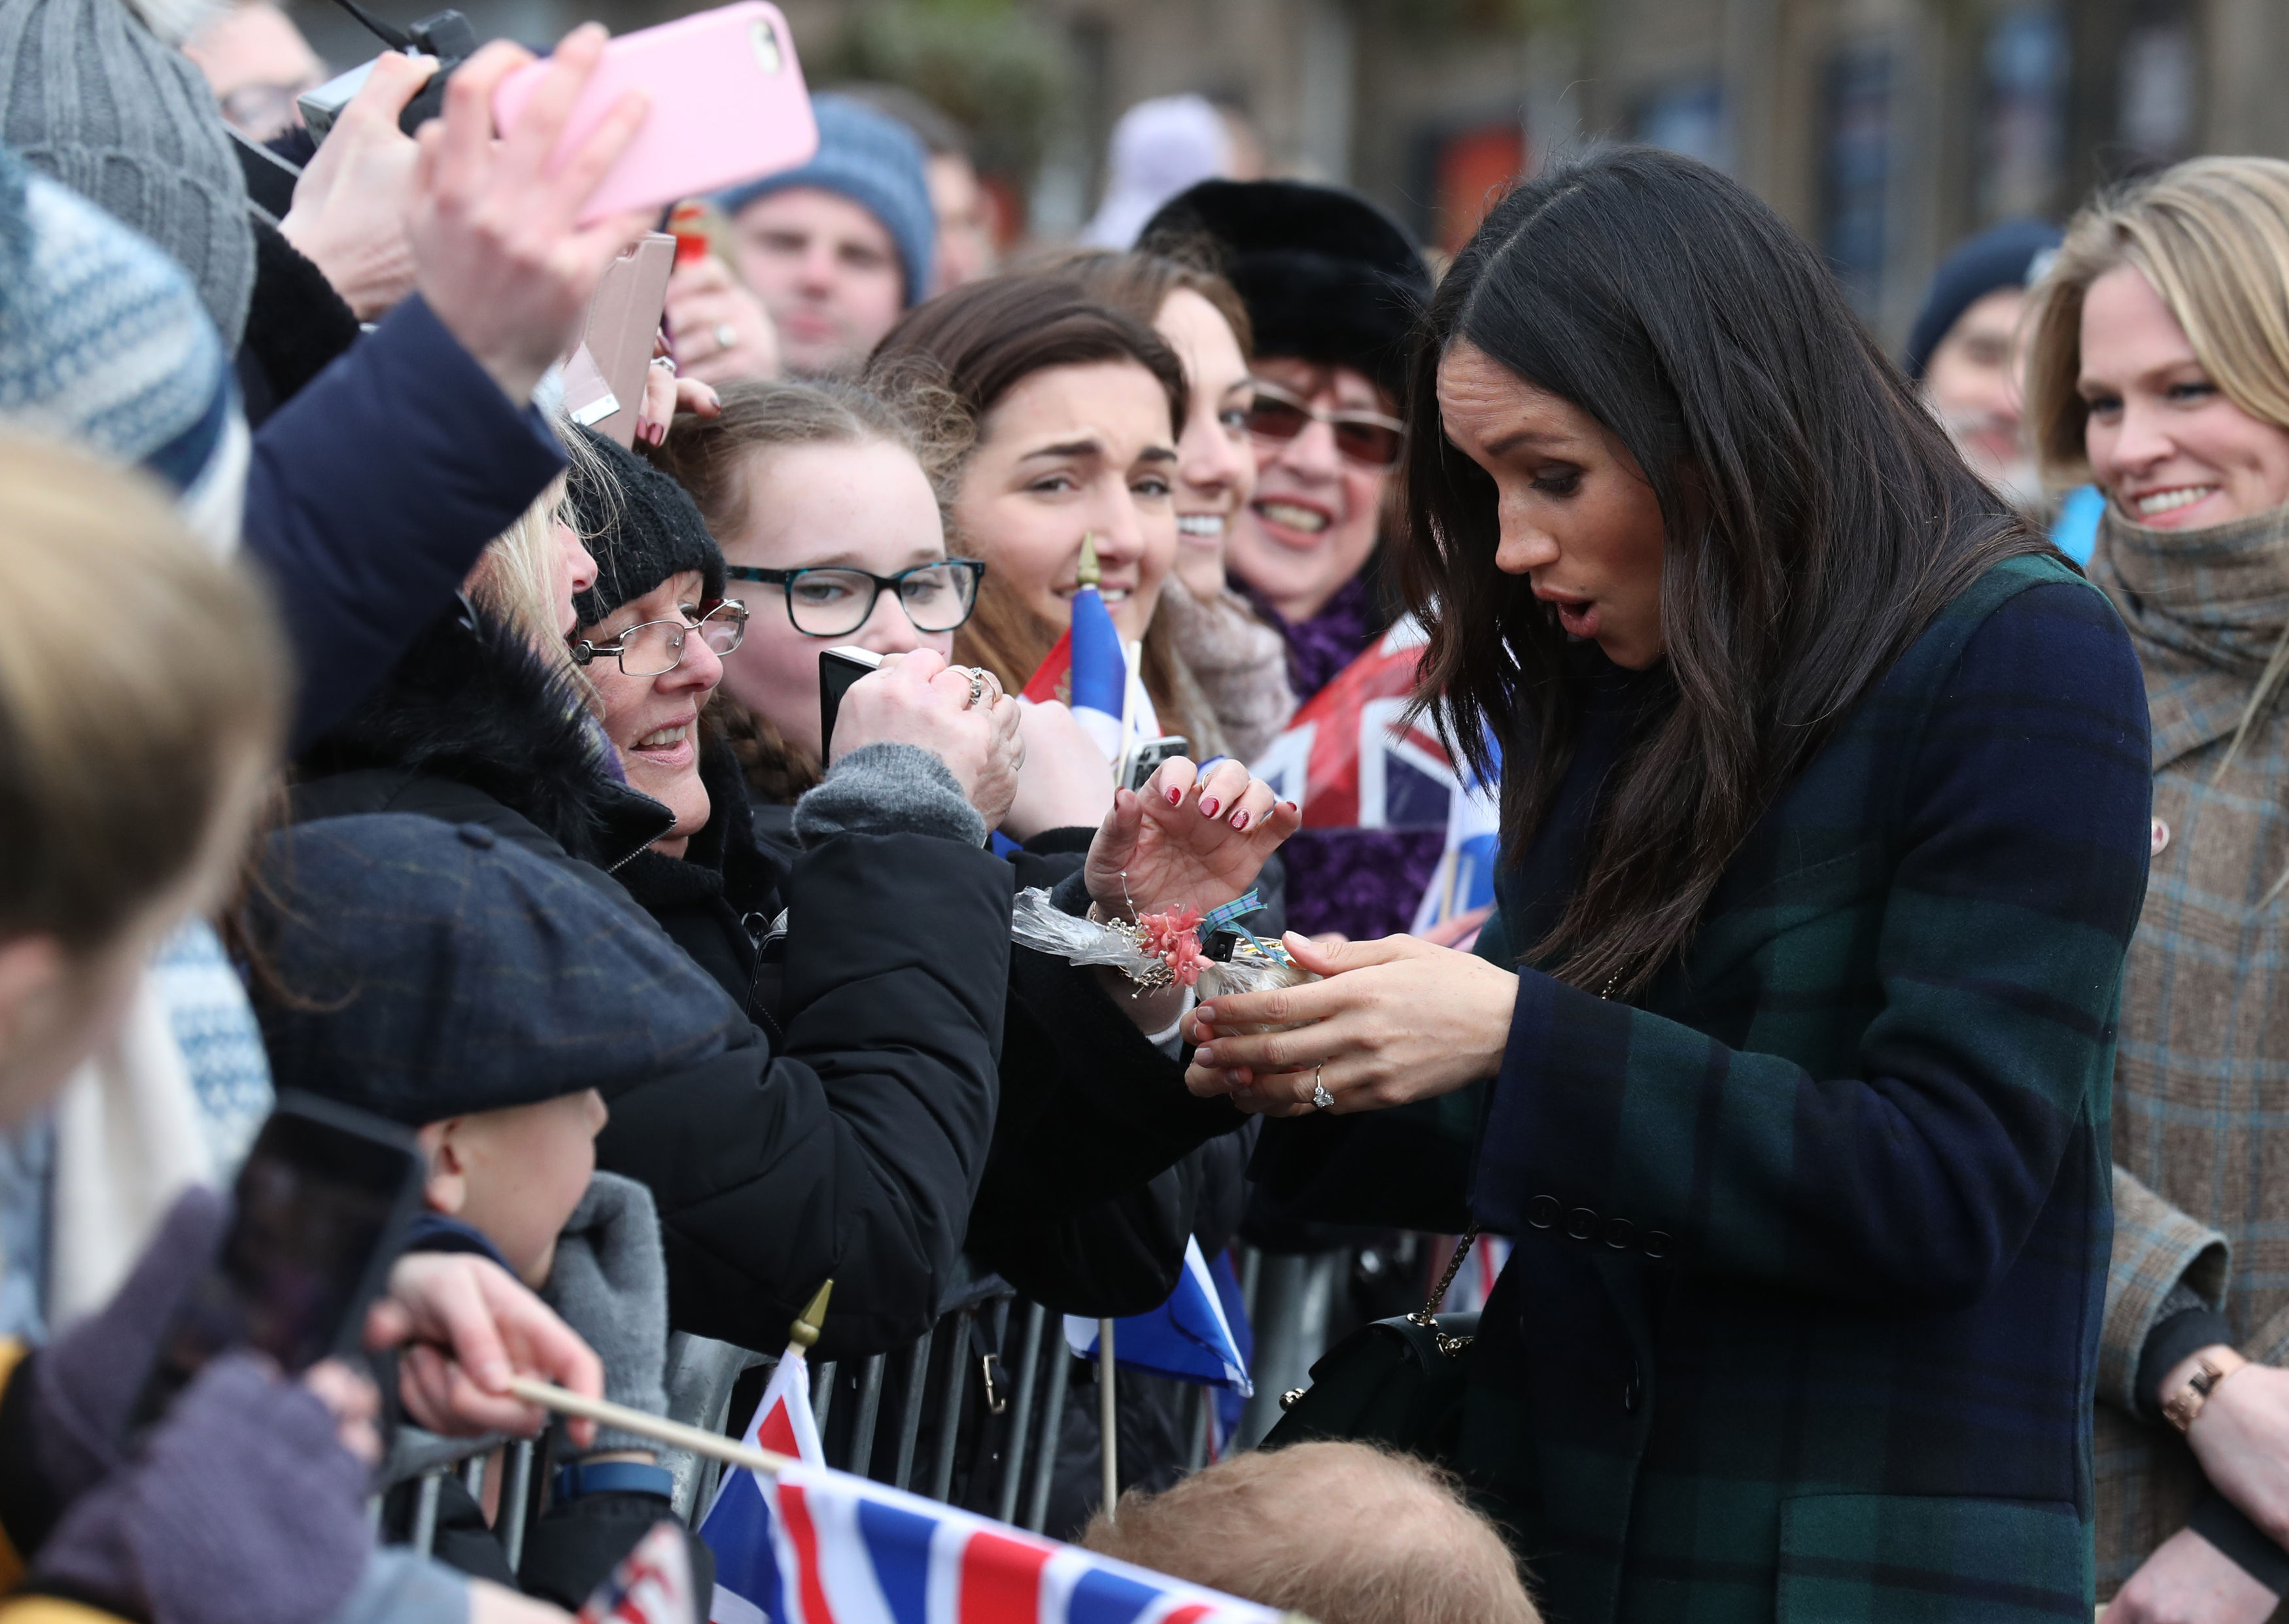 Britain's Prince Harry's fiancée US actress Meghan Markle reacts as she receives a gift during a walkabout on the Esplanade at Edinburgh Castle, during a visit to Scotland on February 13, 2018. (Andrew Milligan—AFP/Getty Images)